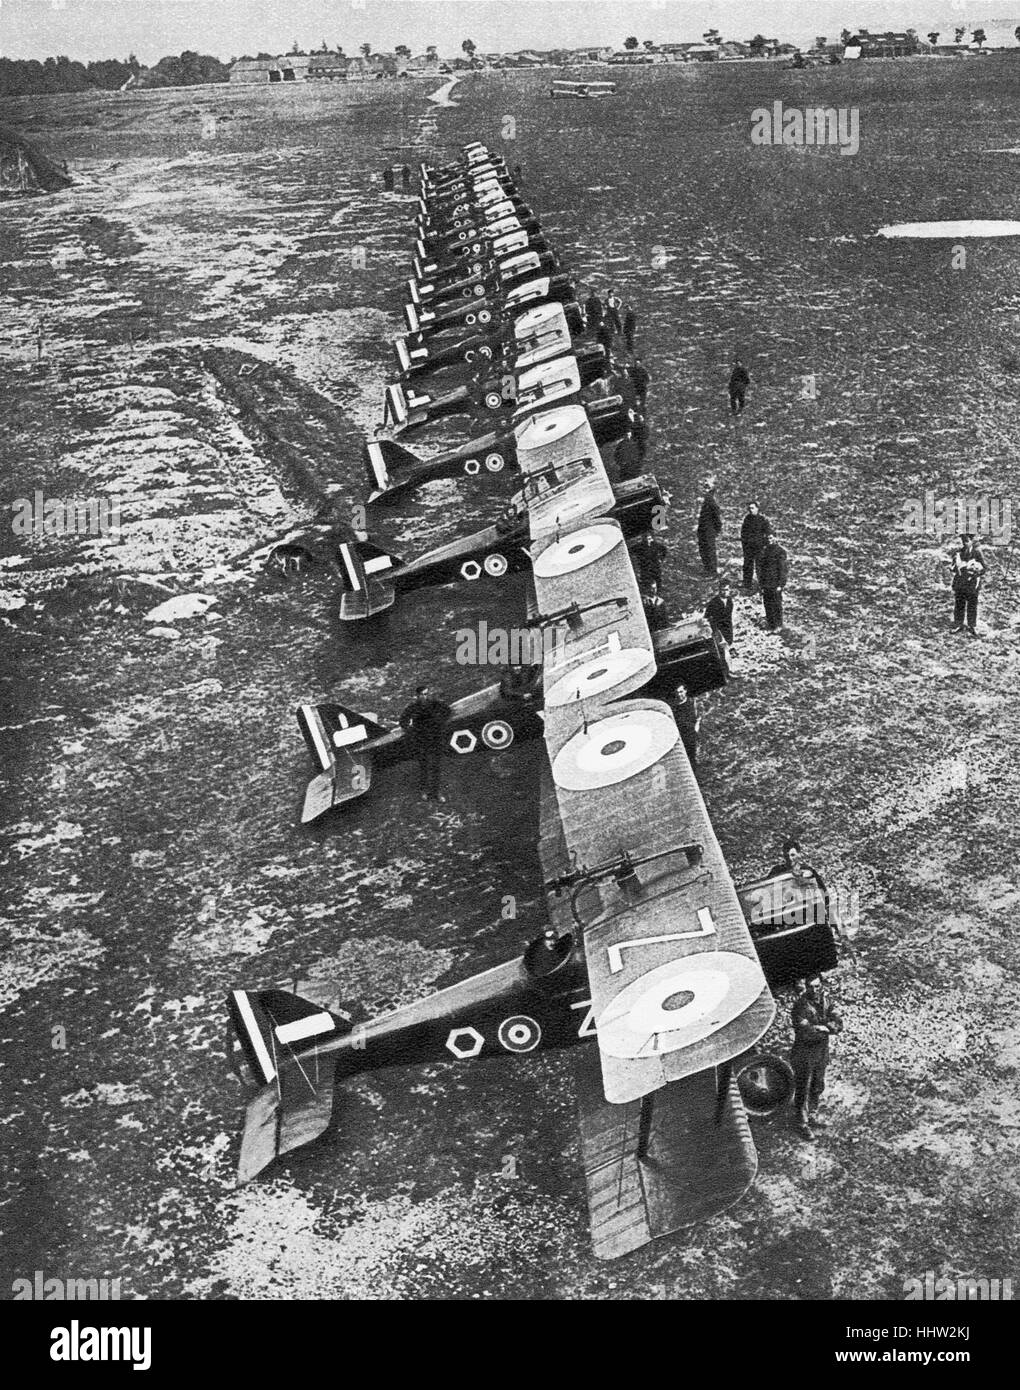 Bombing squadron - fleet of military planes lined up at St Omer, France during the First World War, 1918 Stock Photo